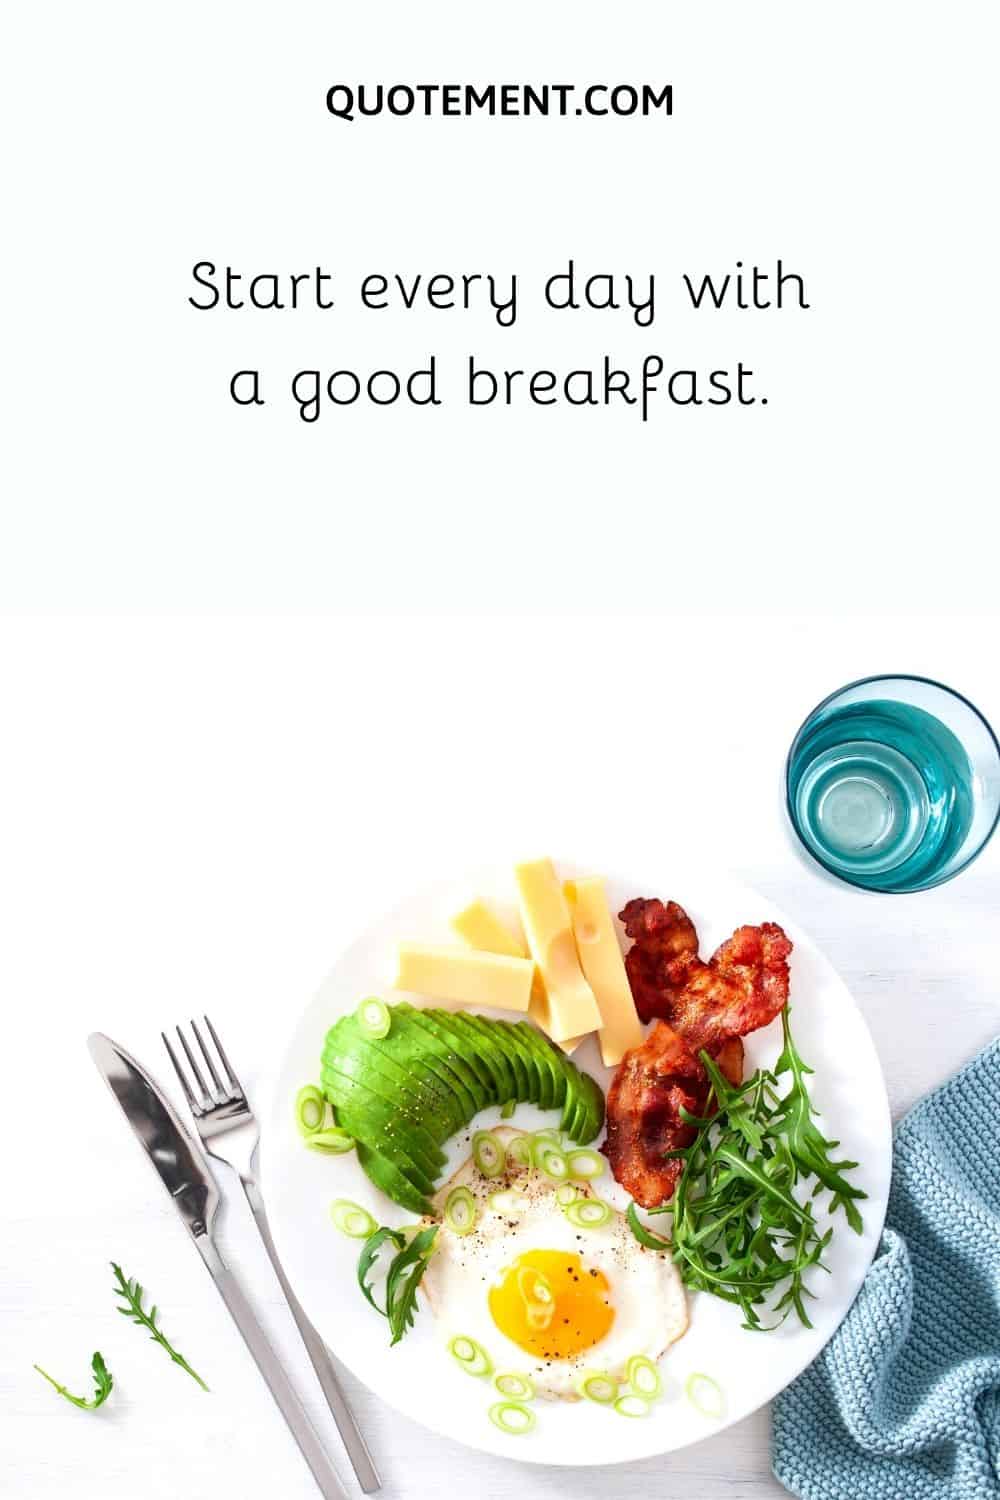 Start every day with a good breakfast.